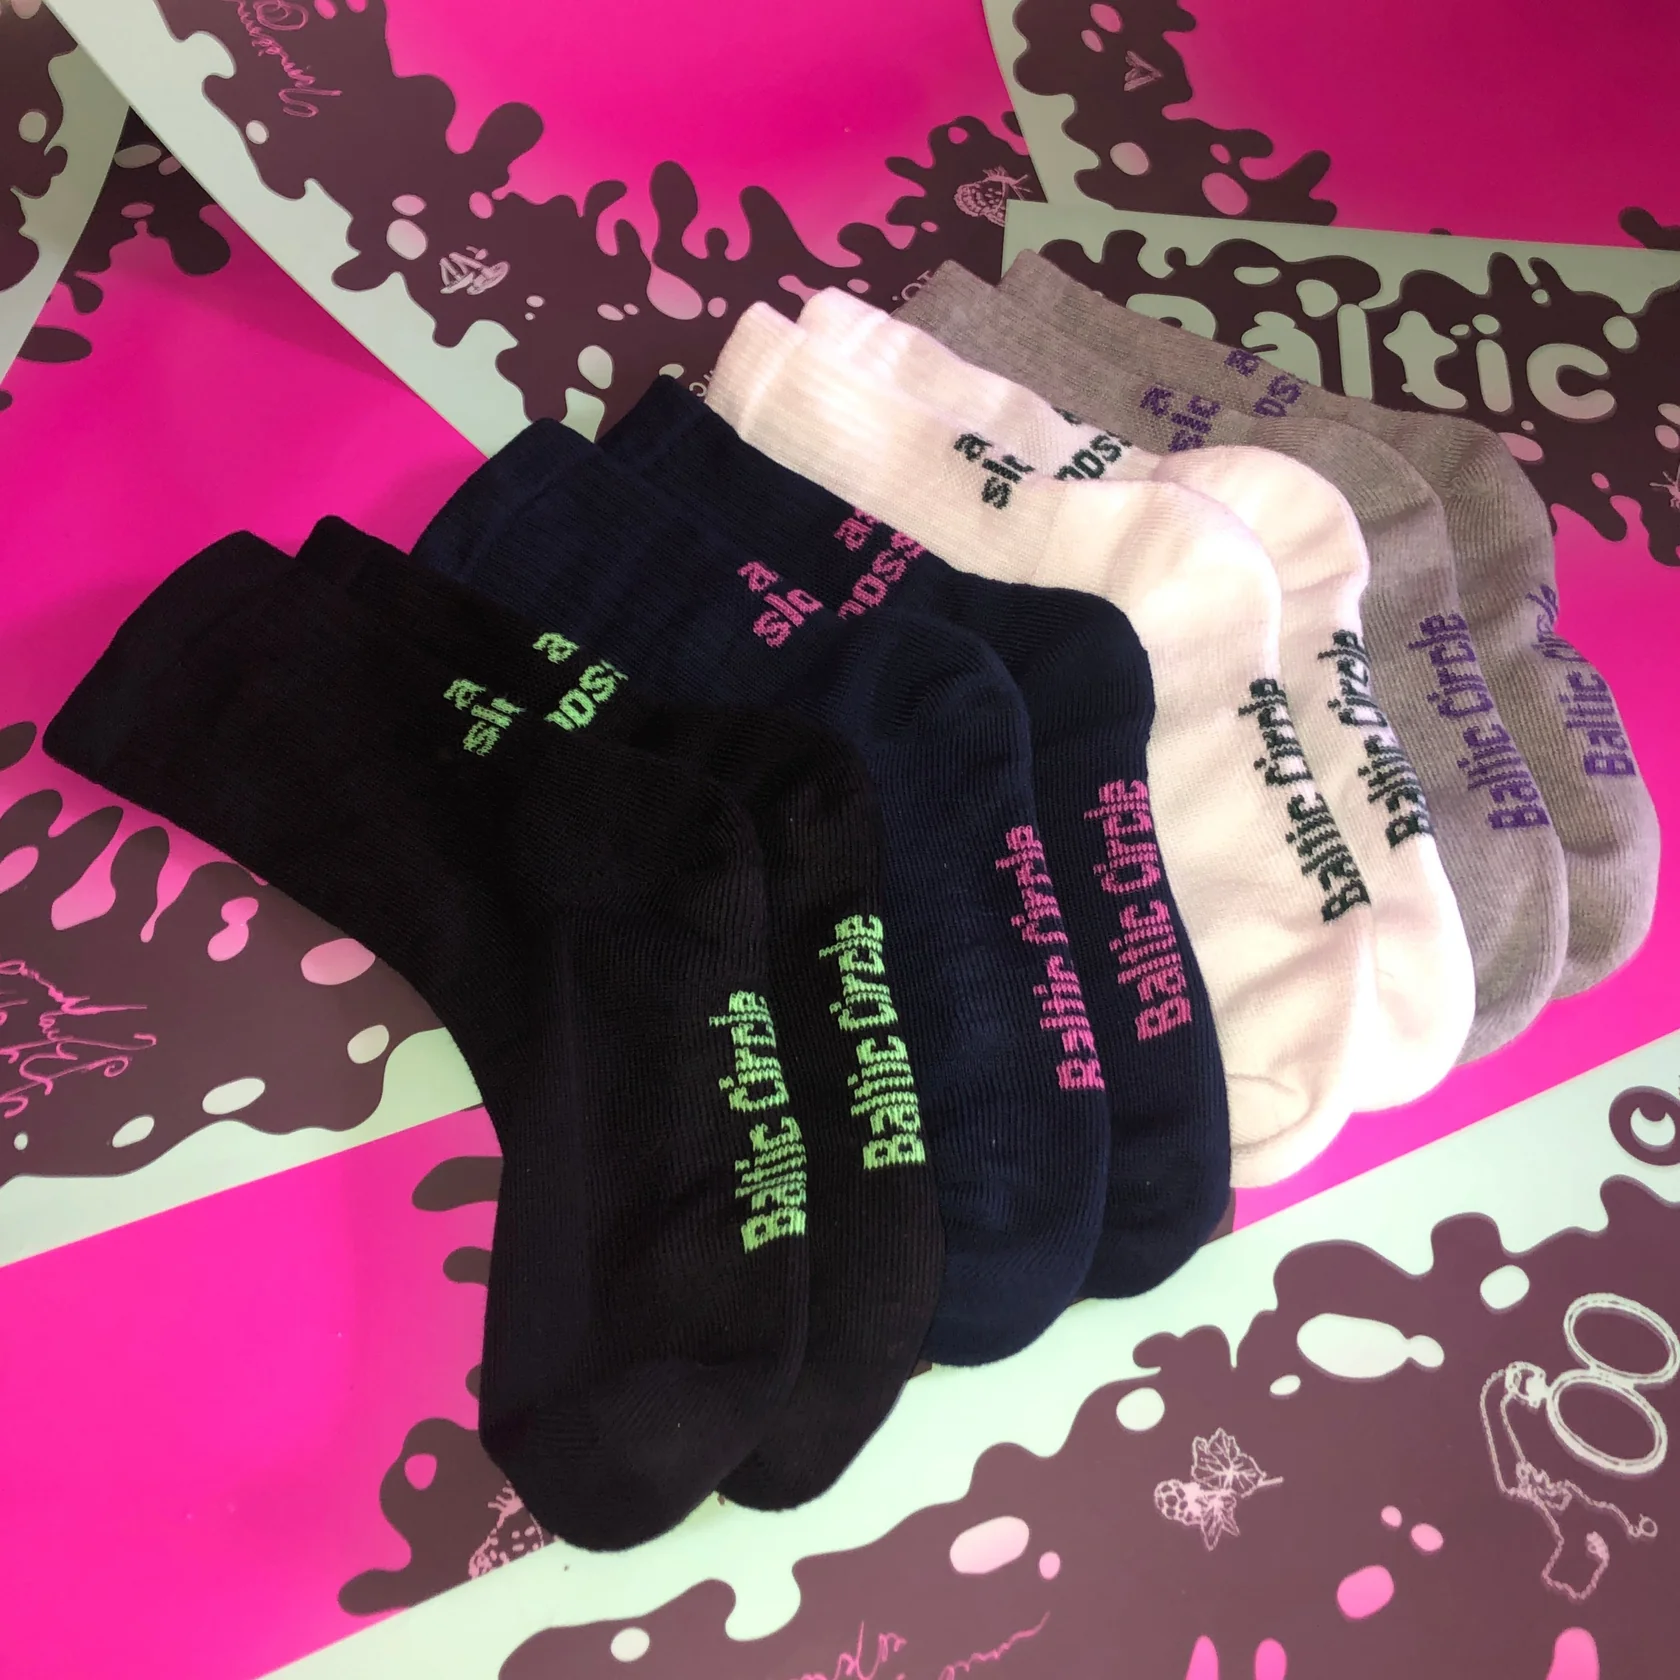 Baltic Circle’s own shop is now open – buy yourself your own pair of festival socks